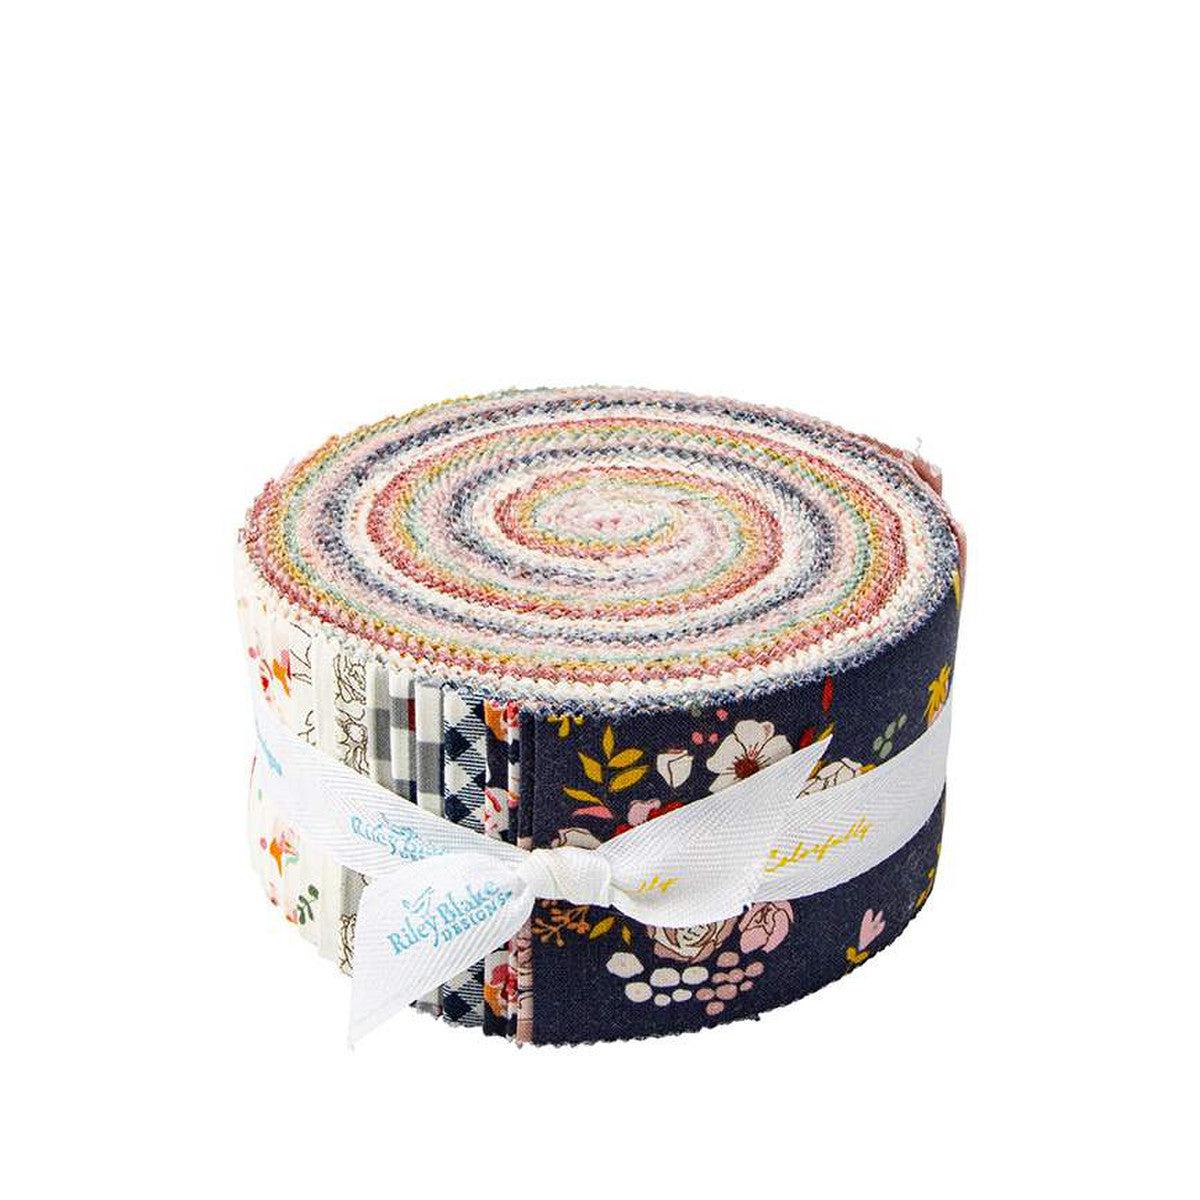 BloomBerry 2 1/2" Jelly Roll-Riley Blake Fabrics-My Favorite Quilt Store